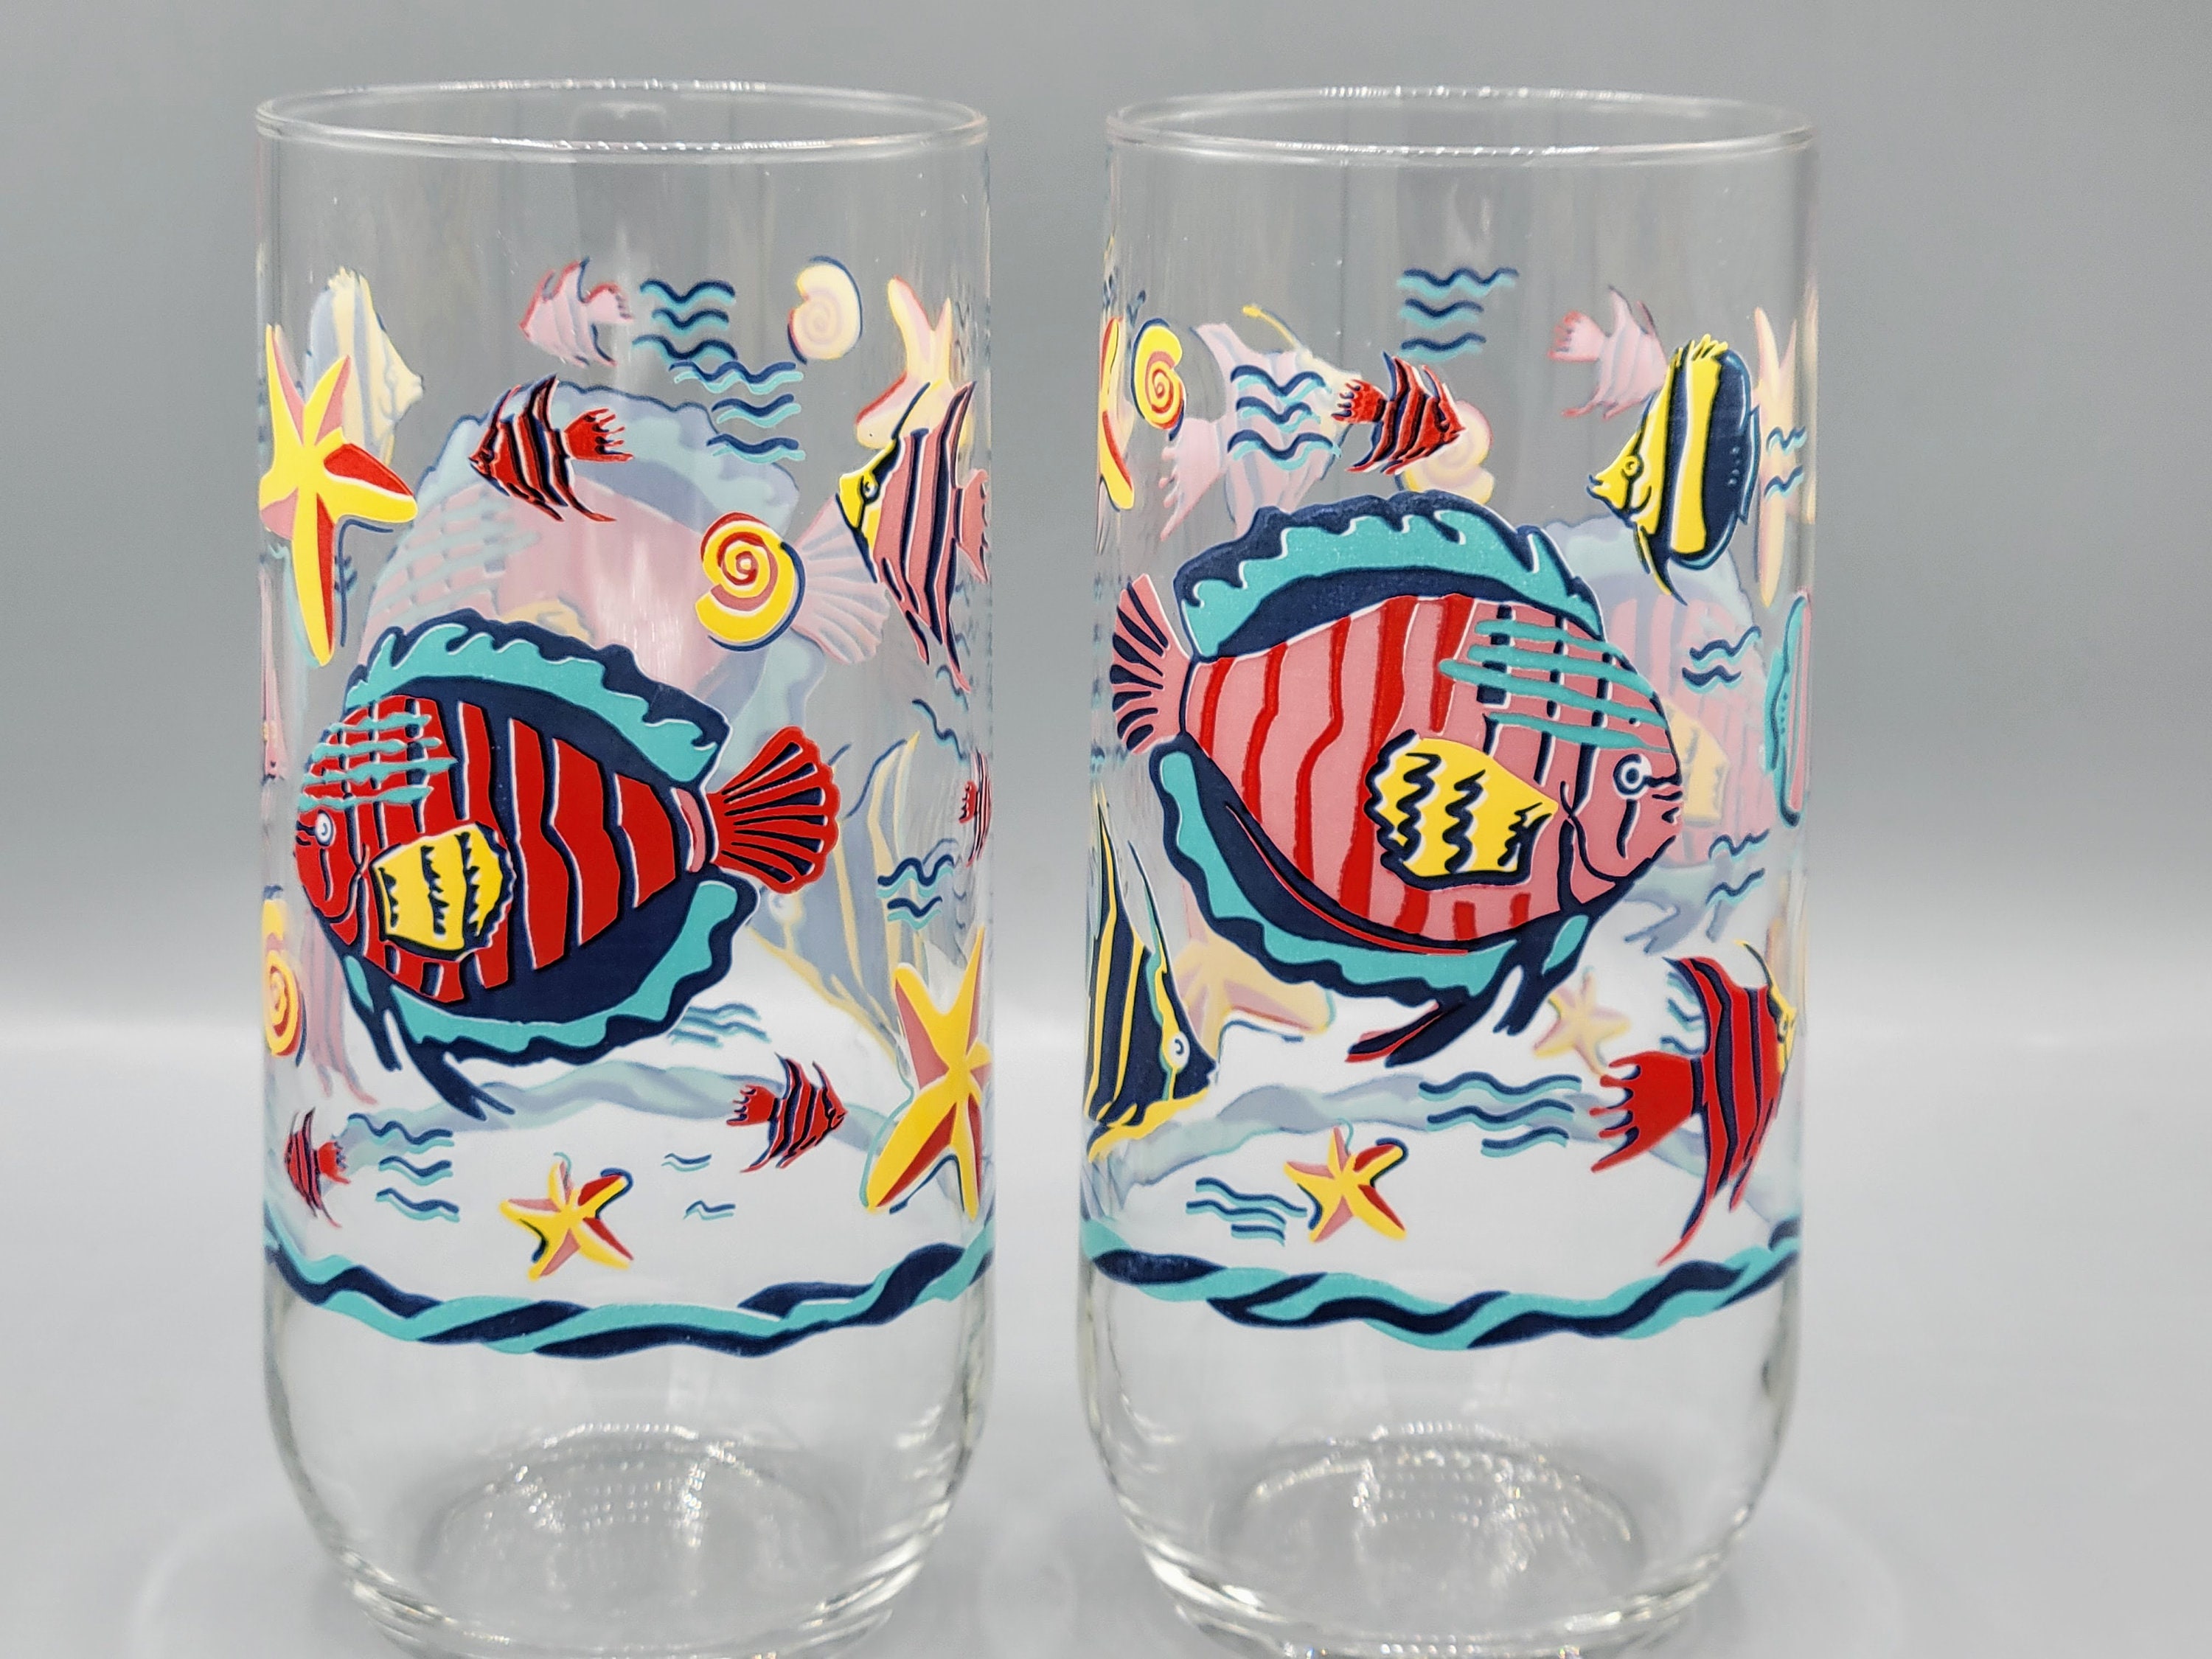 Set of 3 Colorful Fish Everyday Use Drinking Glasses Beachy Vibes Glassware  Tropical Style Fish & Starfish Lake House, Fun at Shore -  Sweden